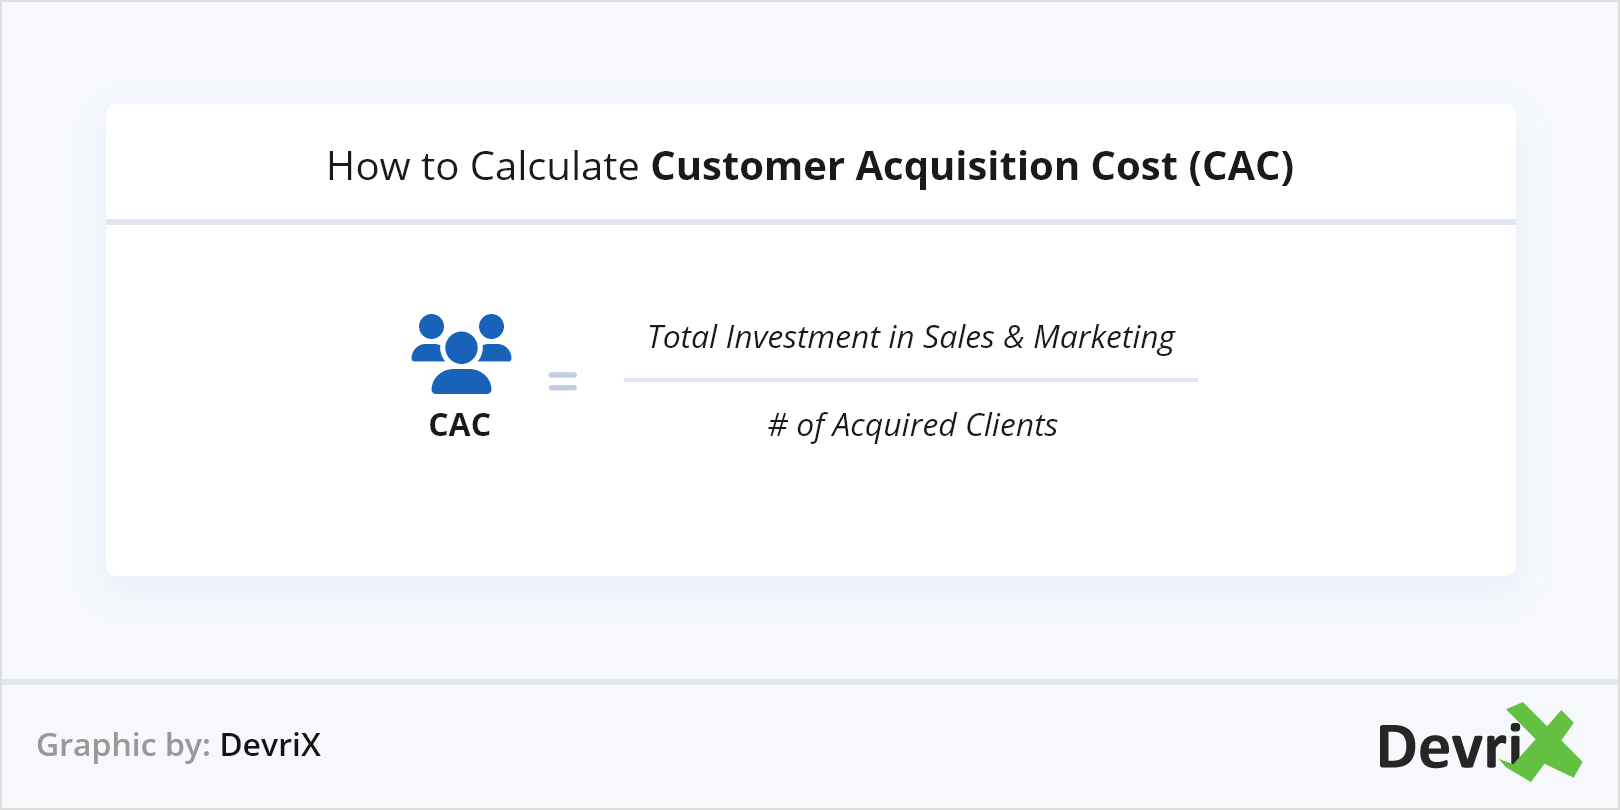 How to Calculate Customer Acquisition Cost (CAC)